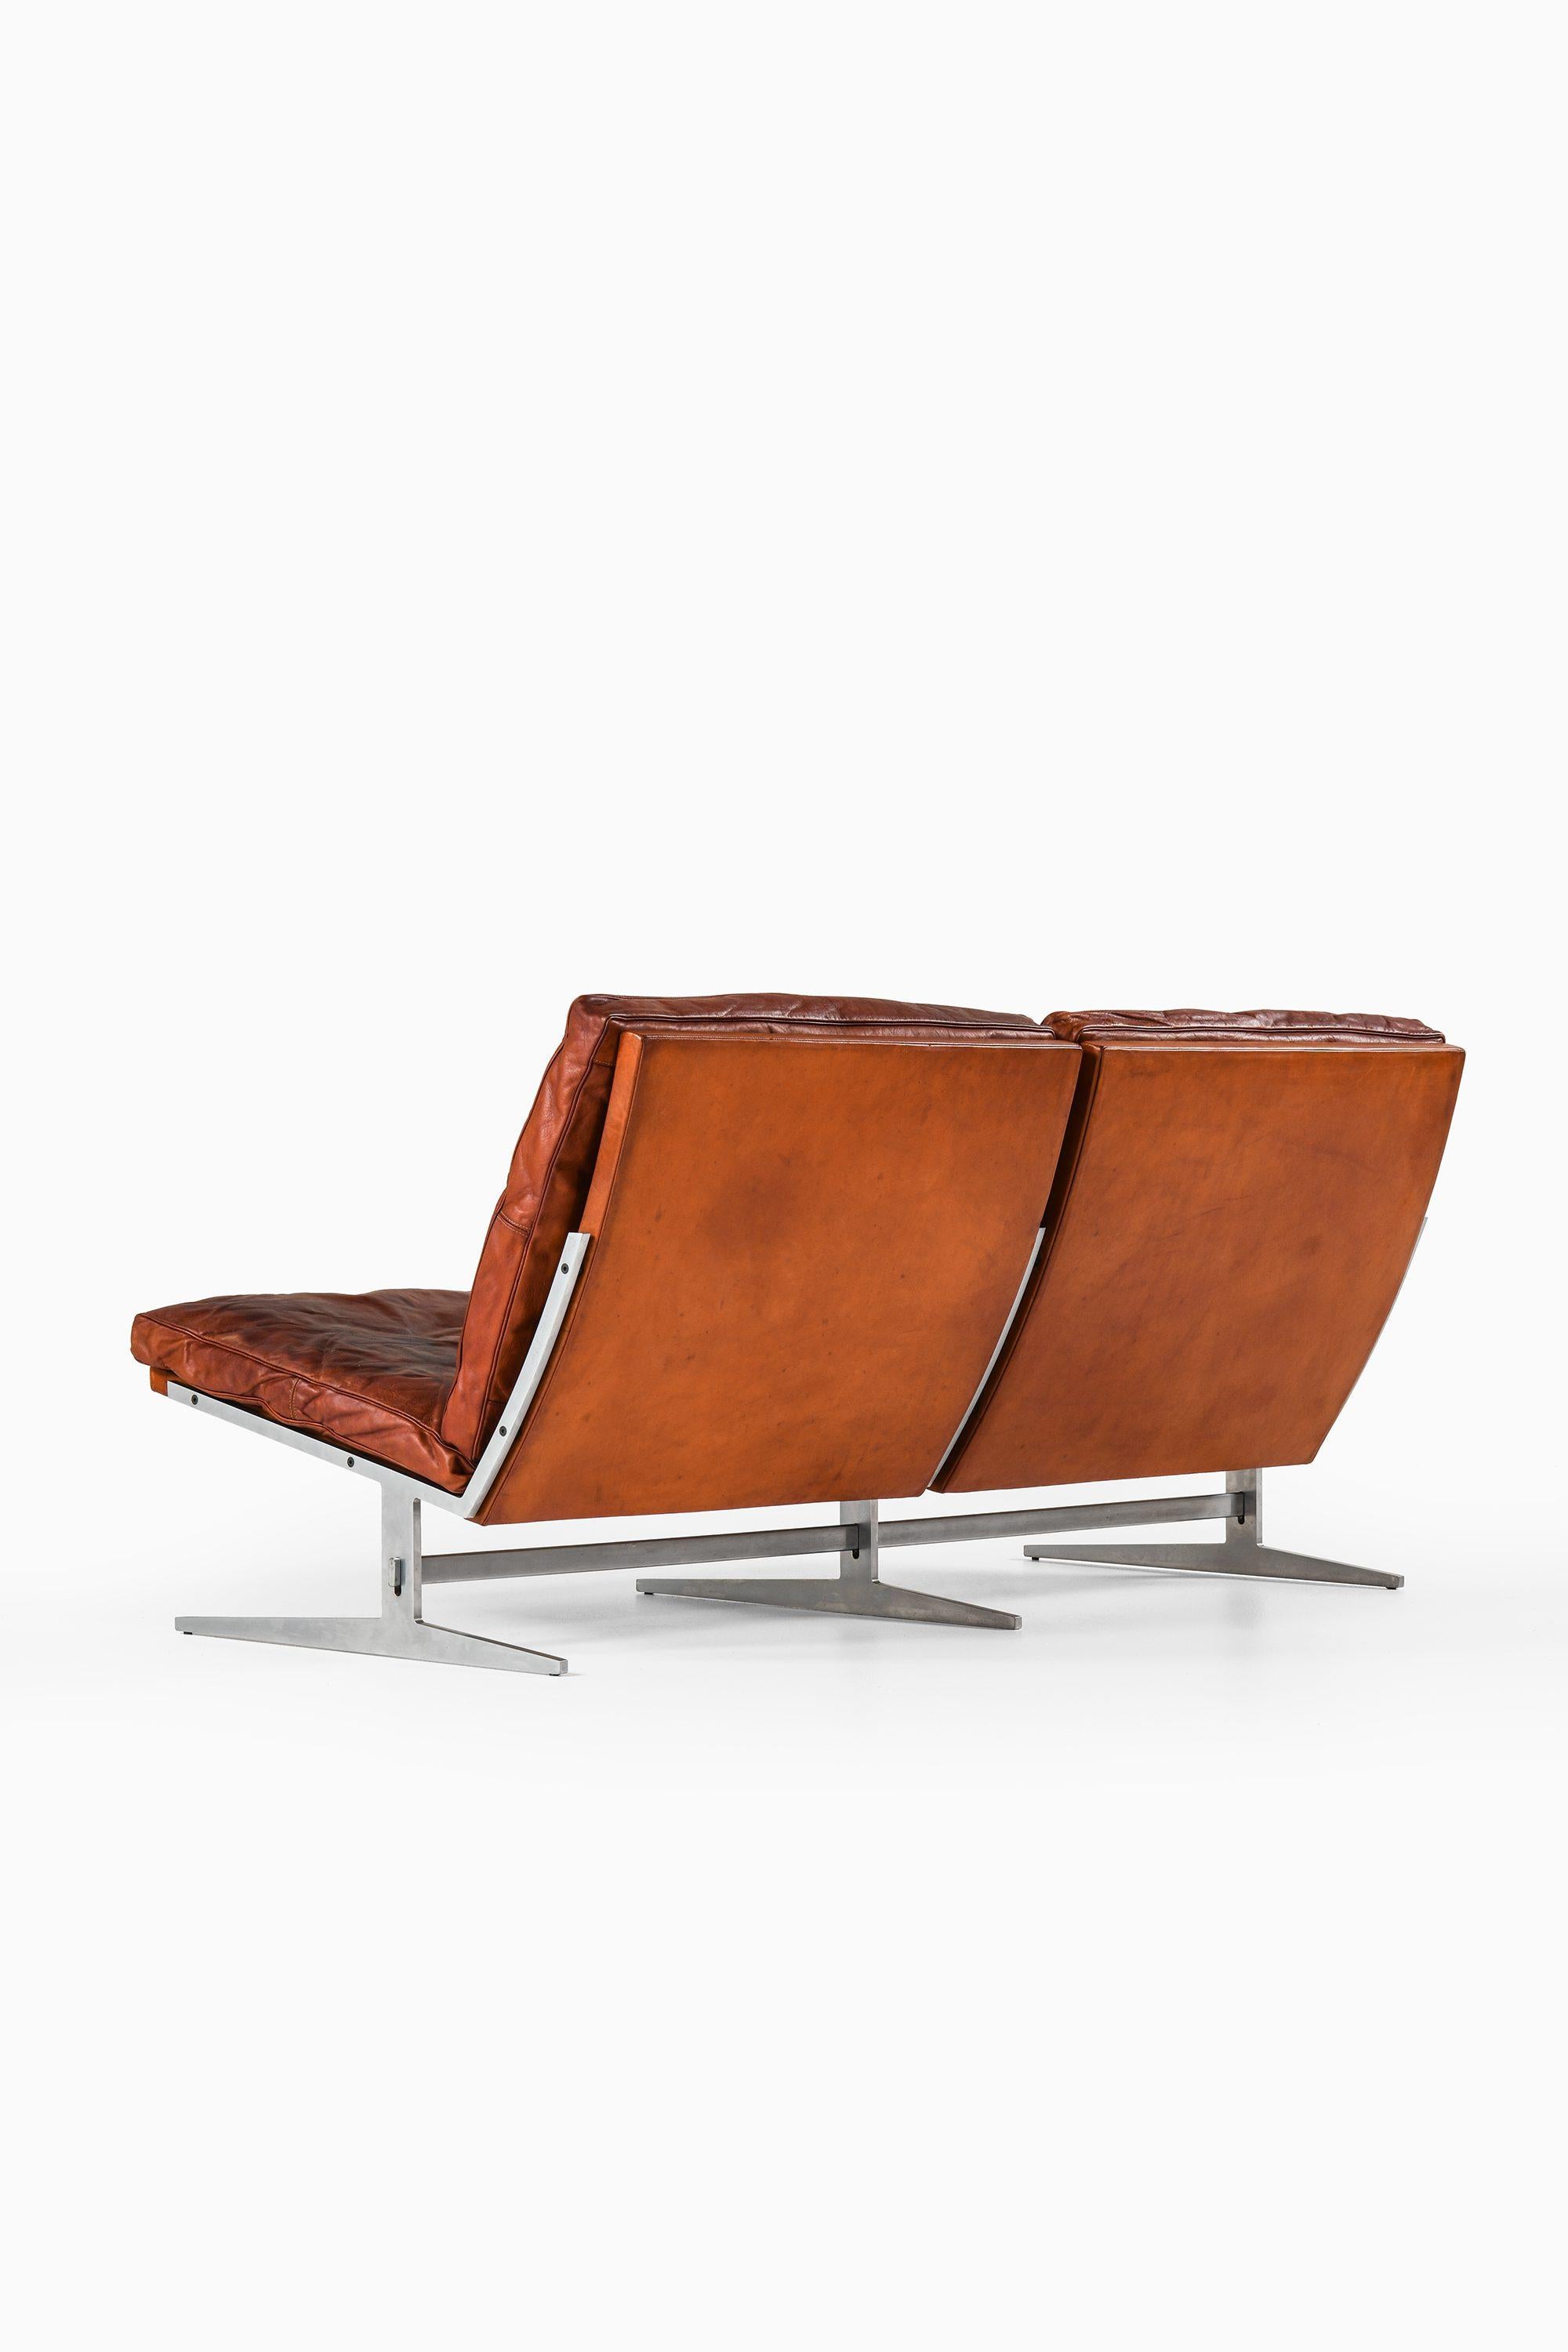 Danish Two Seater Sofa in Steel & Leather by Jørgen Kastholm & Preben Fabricius, 1960's For Sale